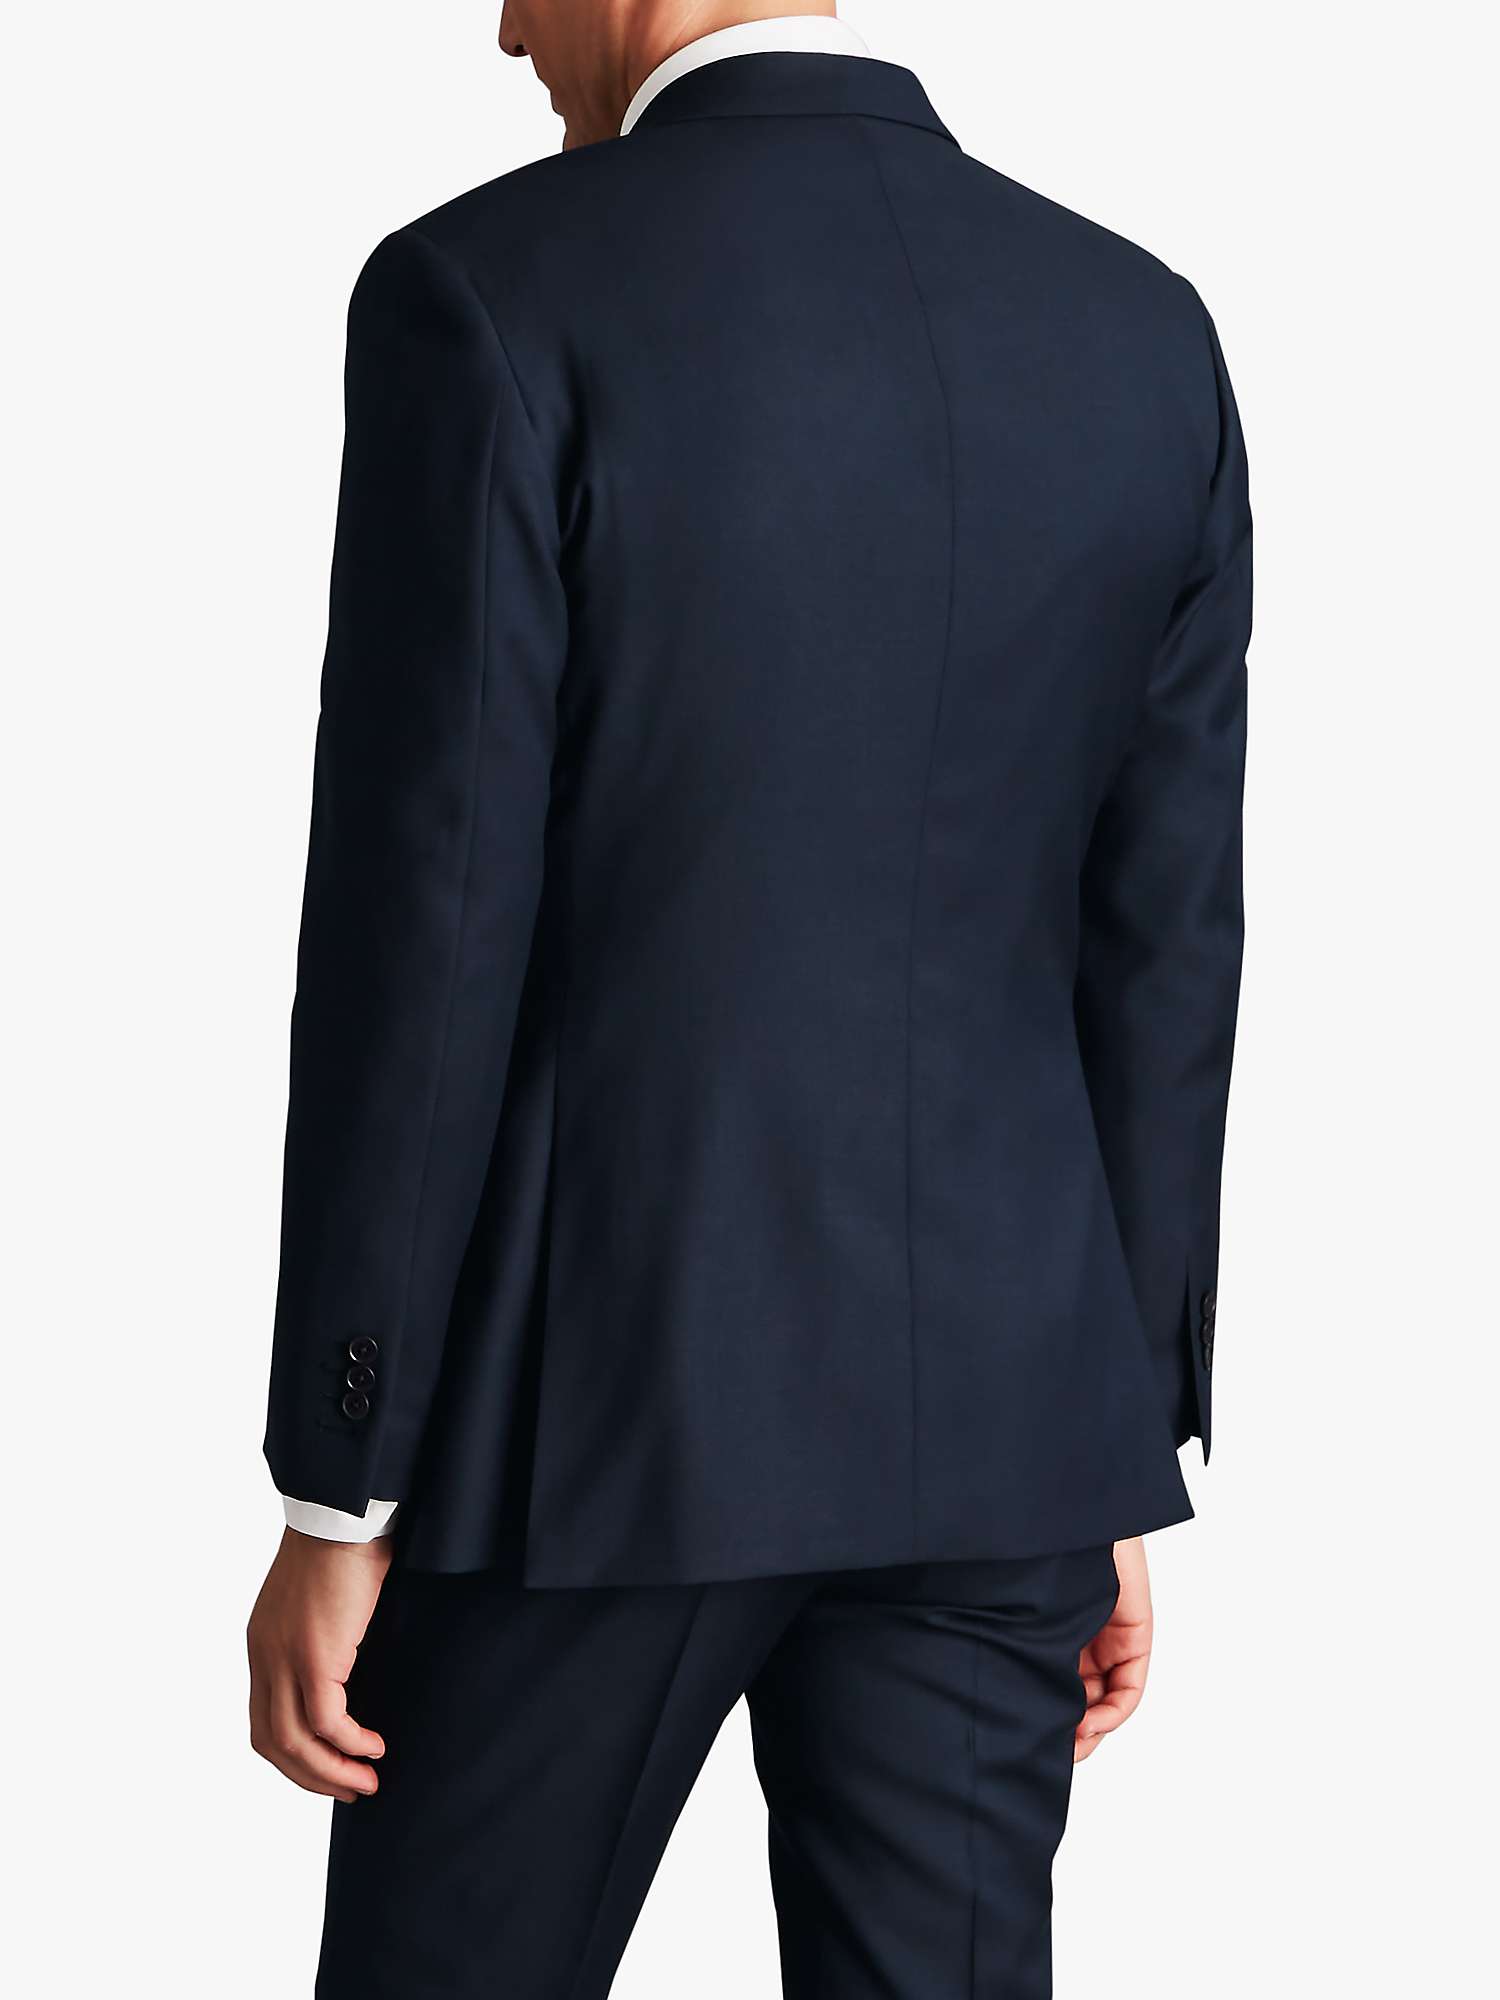 Buy Charles Tyrwhitt Natural Stretch Twill Suit Jacket Online at johnlewis.com